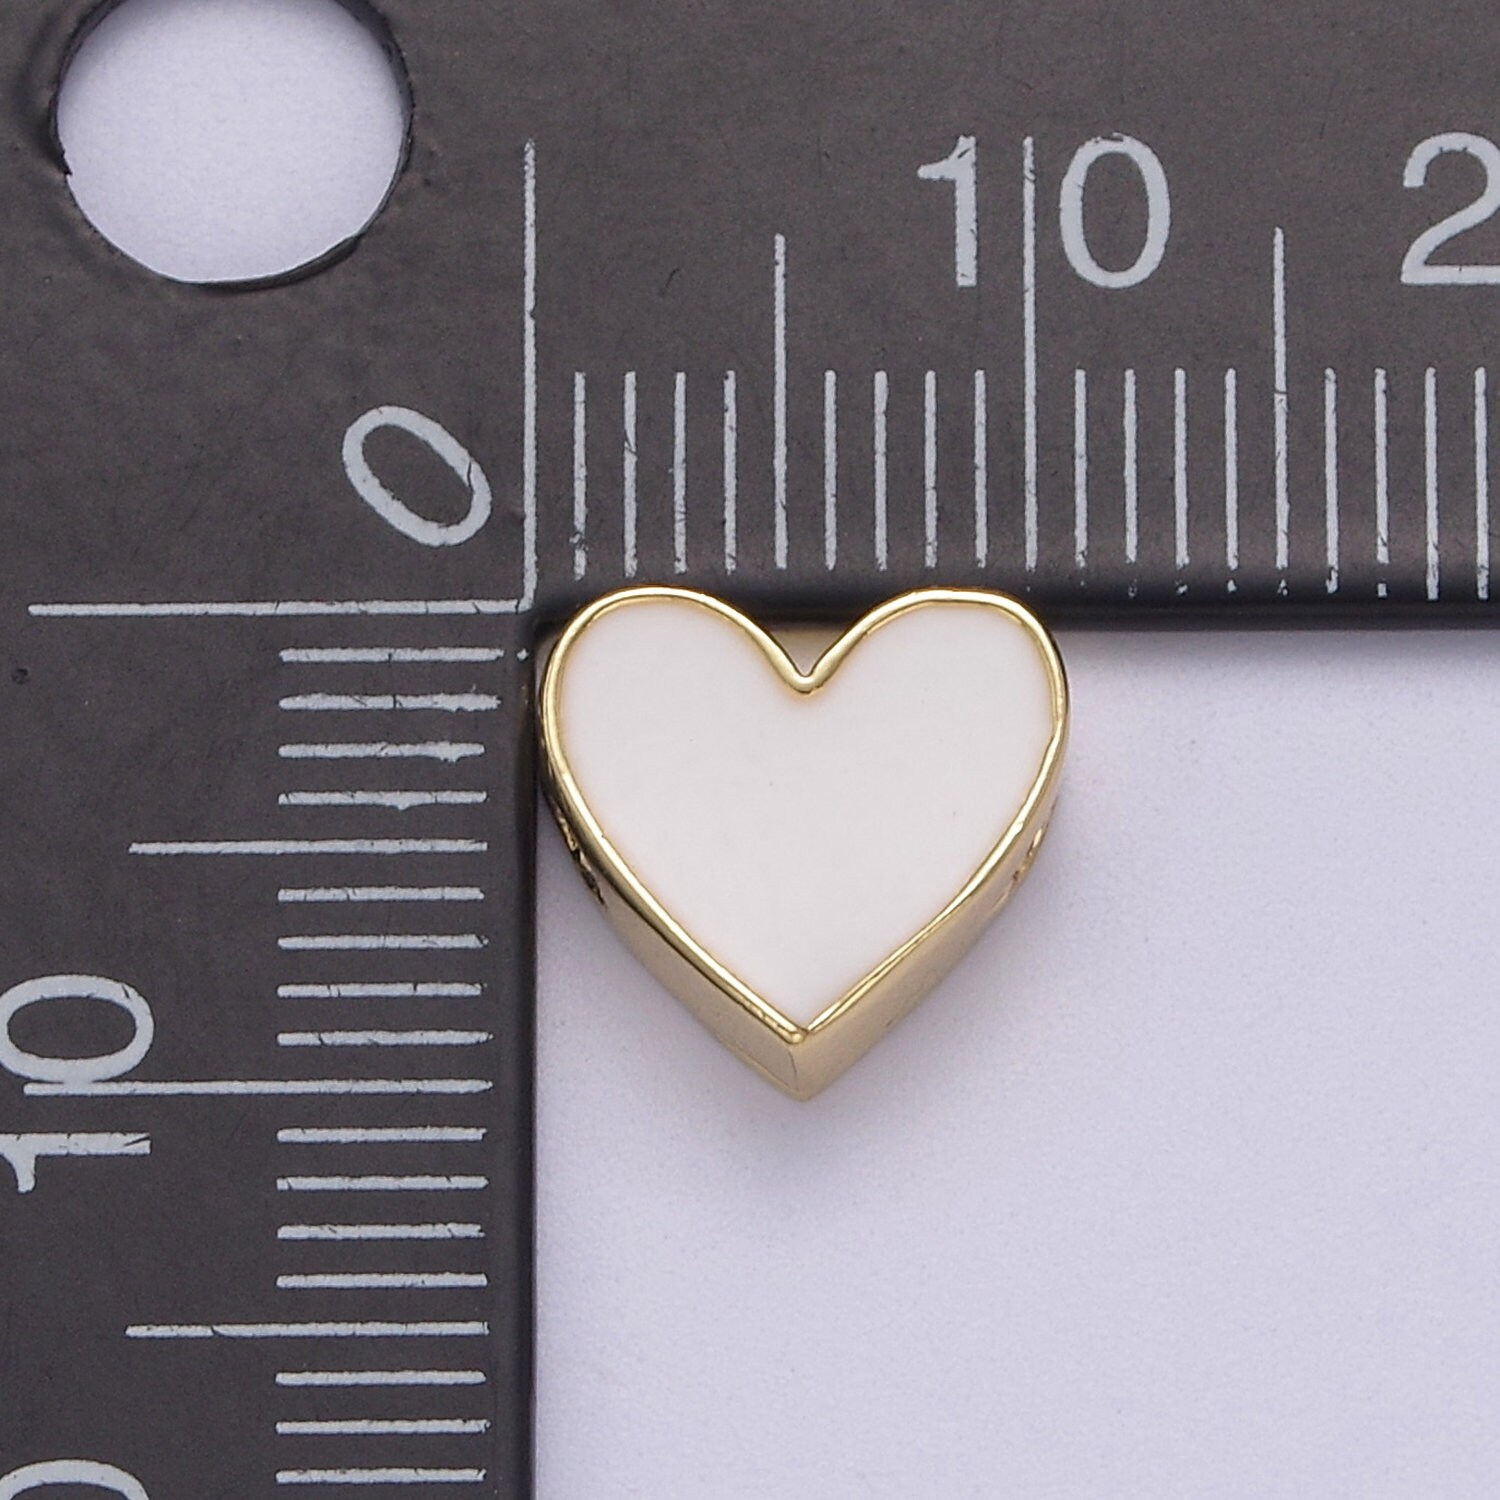 Pastel Pink Heart Bead Gold Filled Beads Spacer for Bracelet 